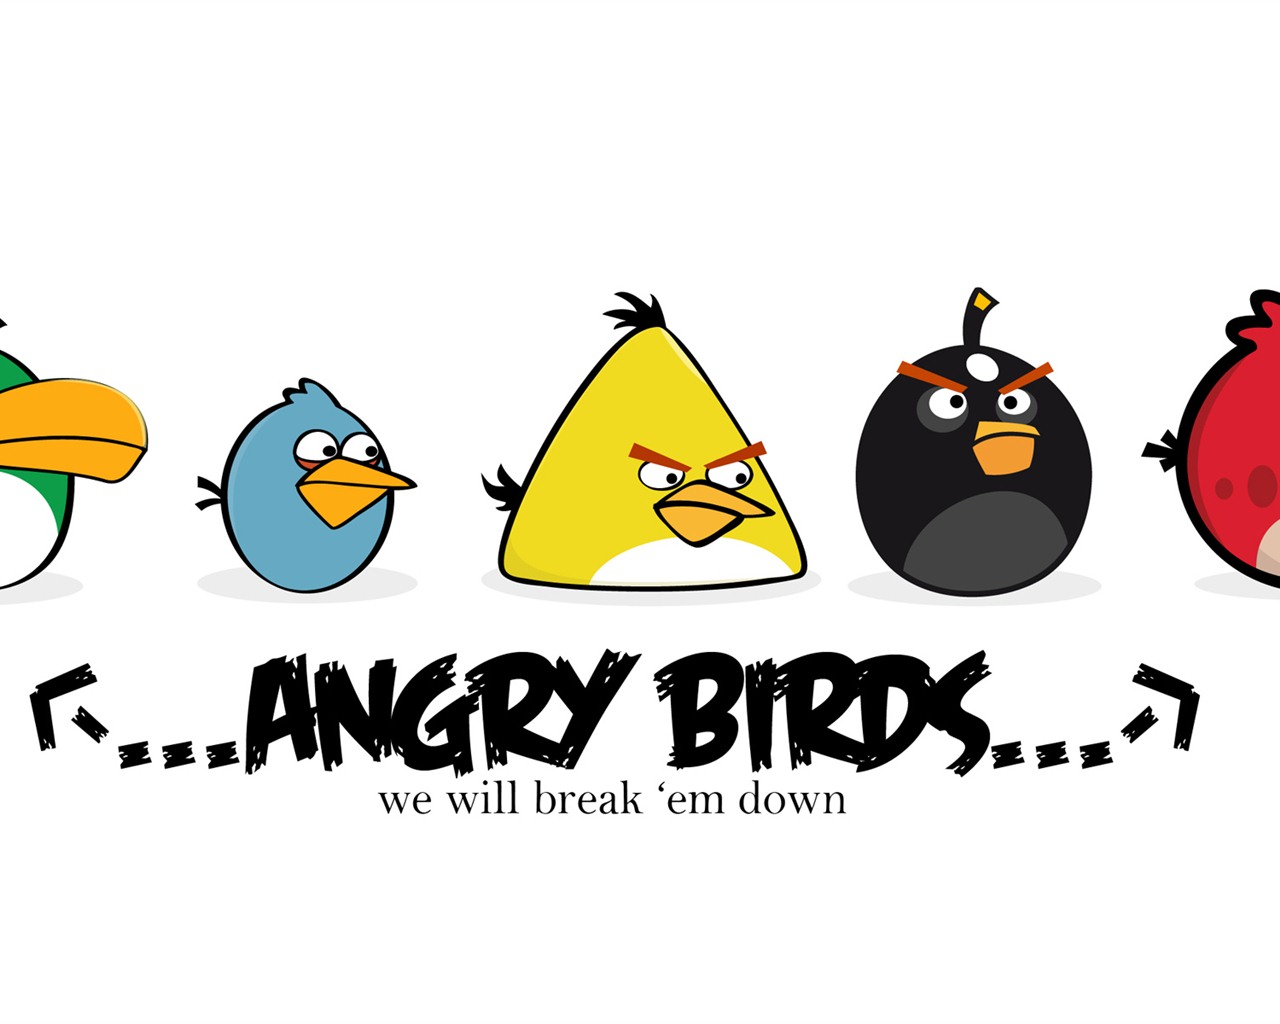 Angry Birds Game Wallpapers #2 - 1280x1024